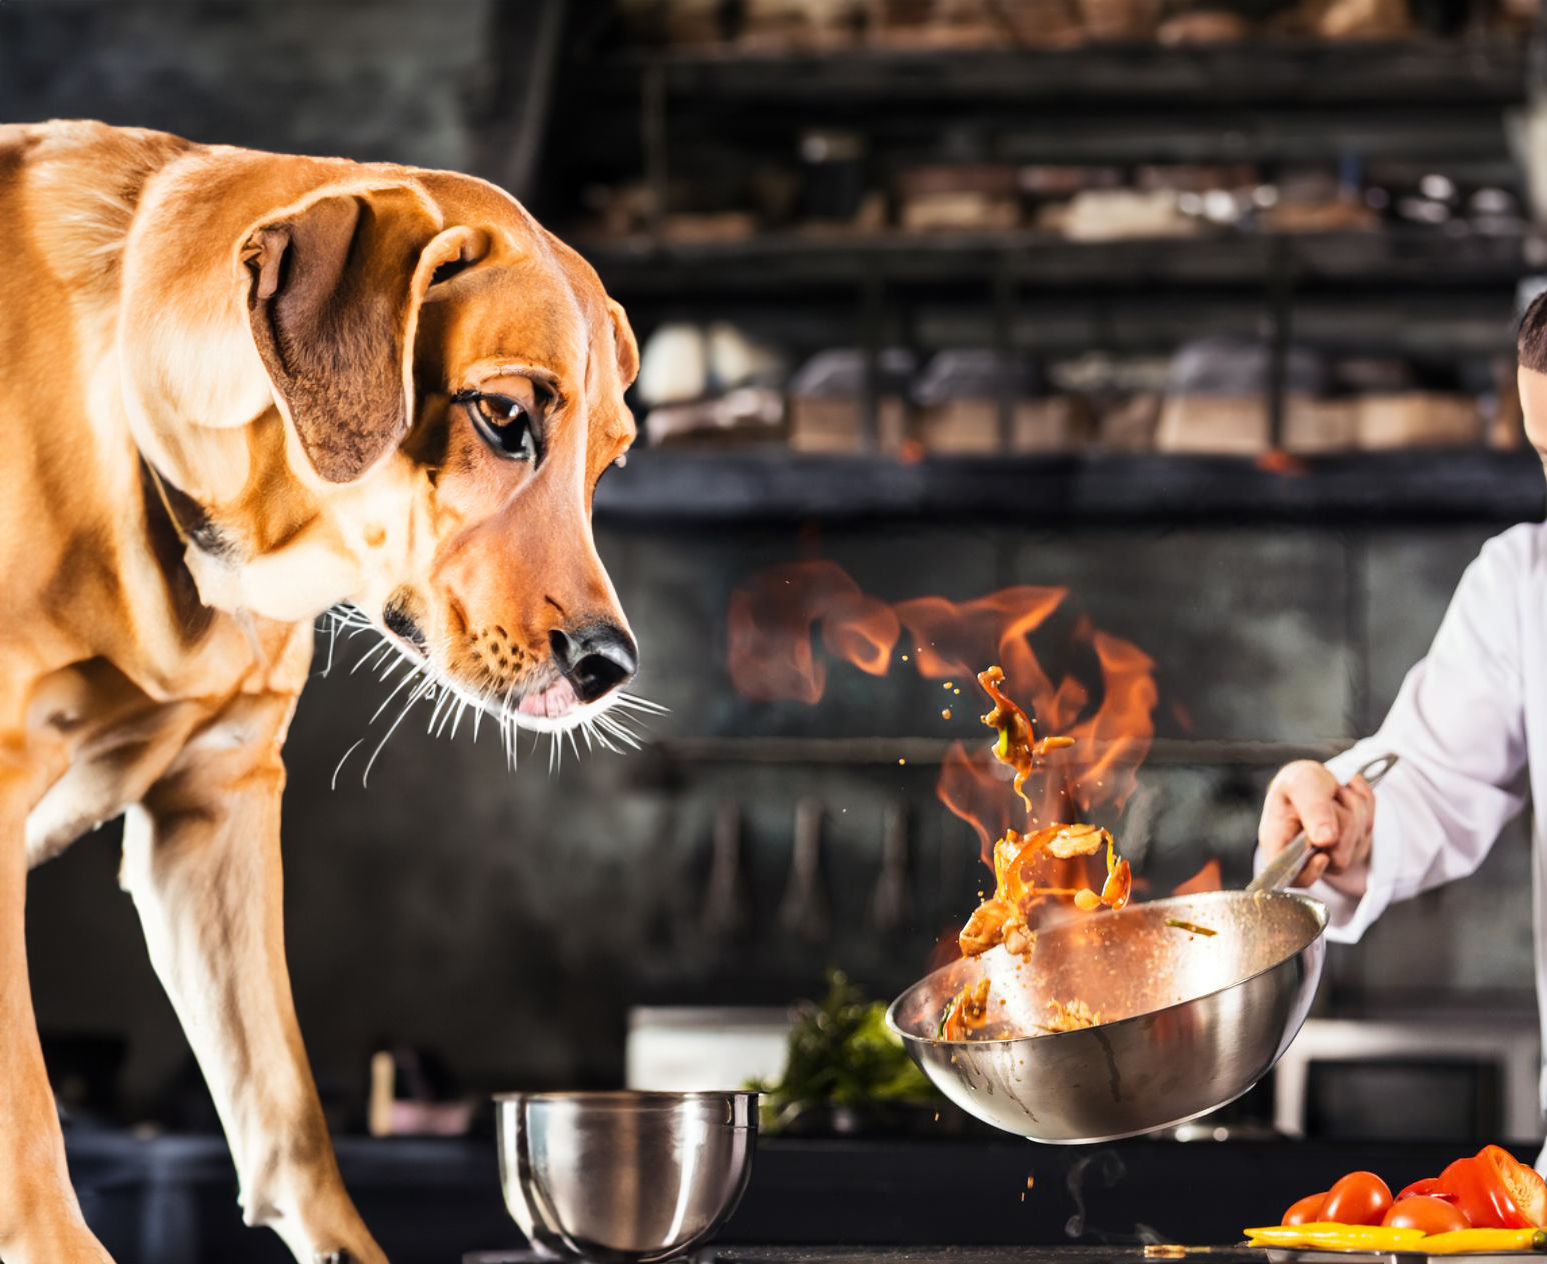 can dogs eat hot food